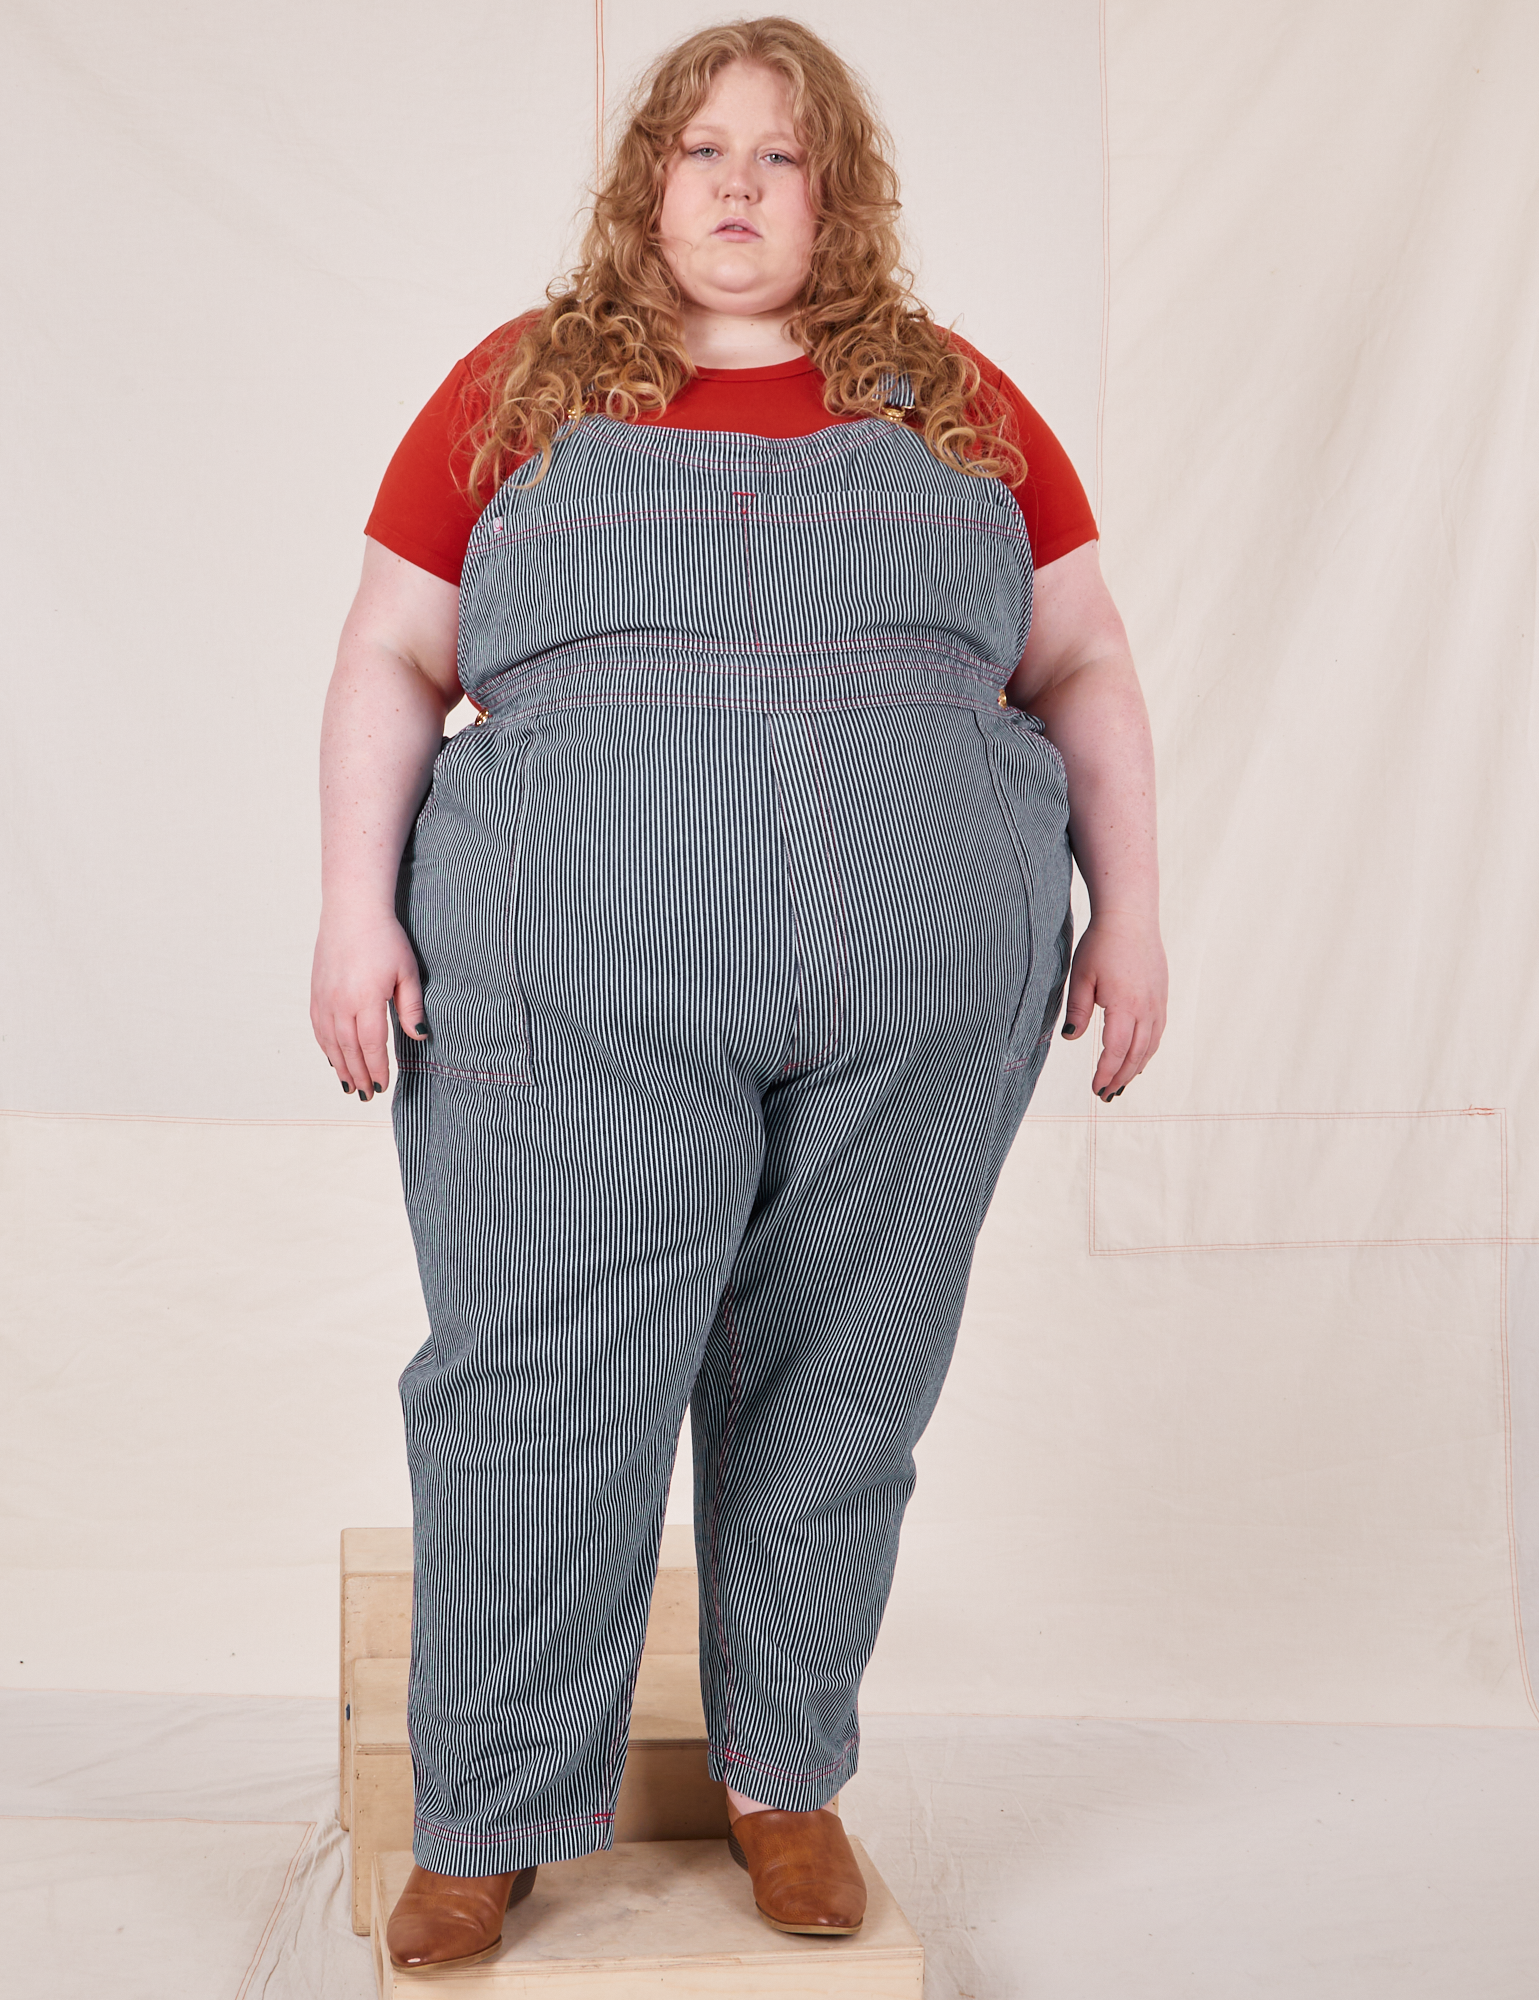 Catie is 5&#39;11&quot; and wearing 5XL Railroad Stripe Denim Original Overalls paired with paprika Baby Tee